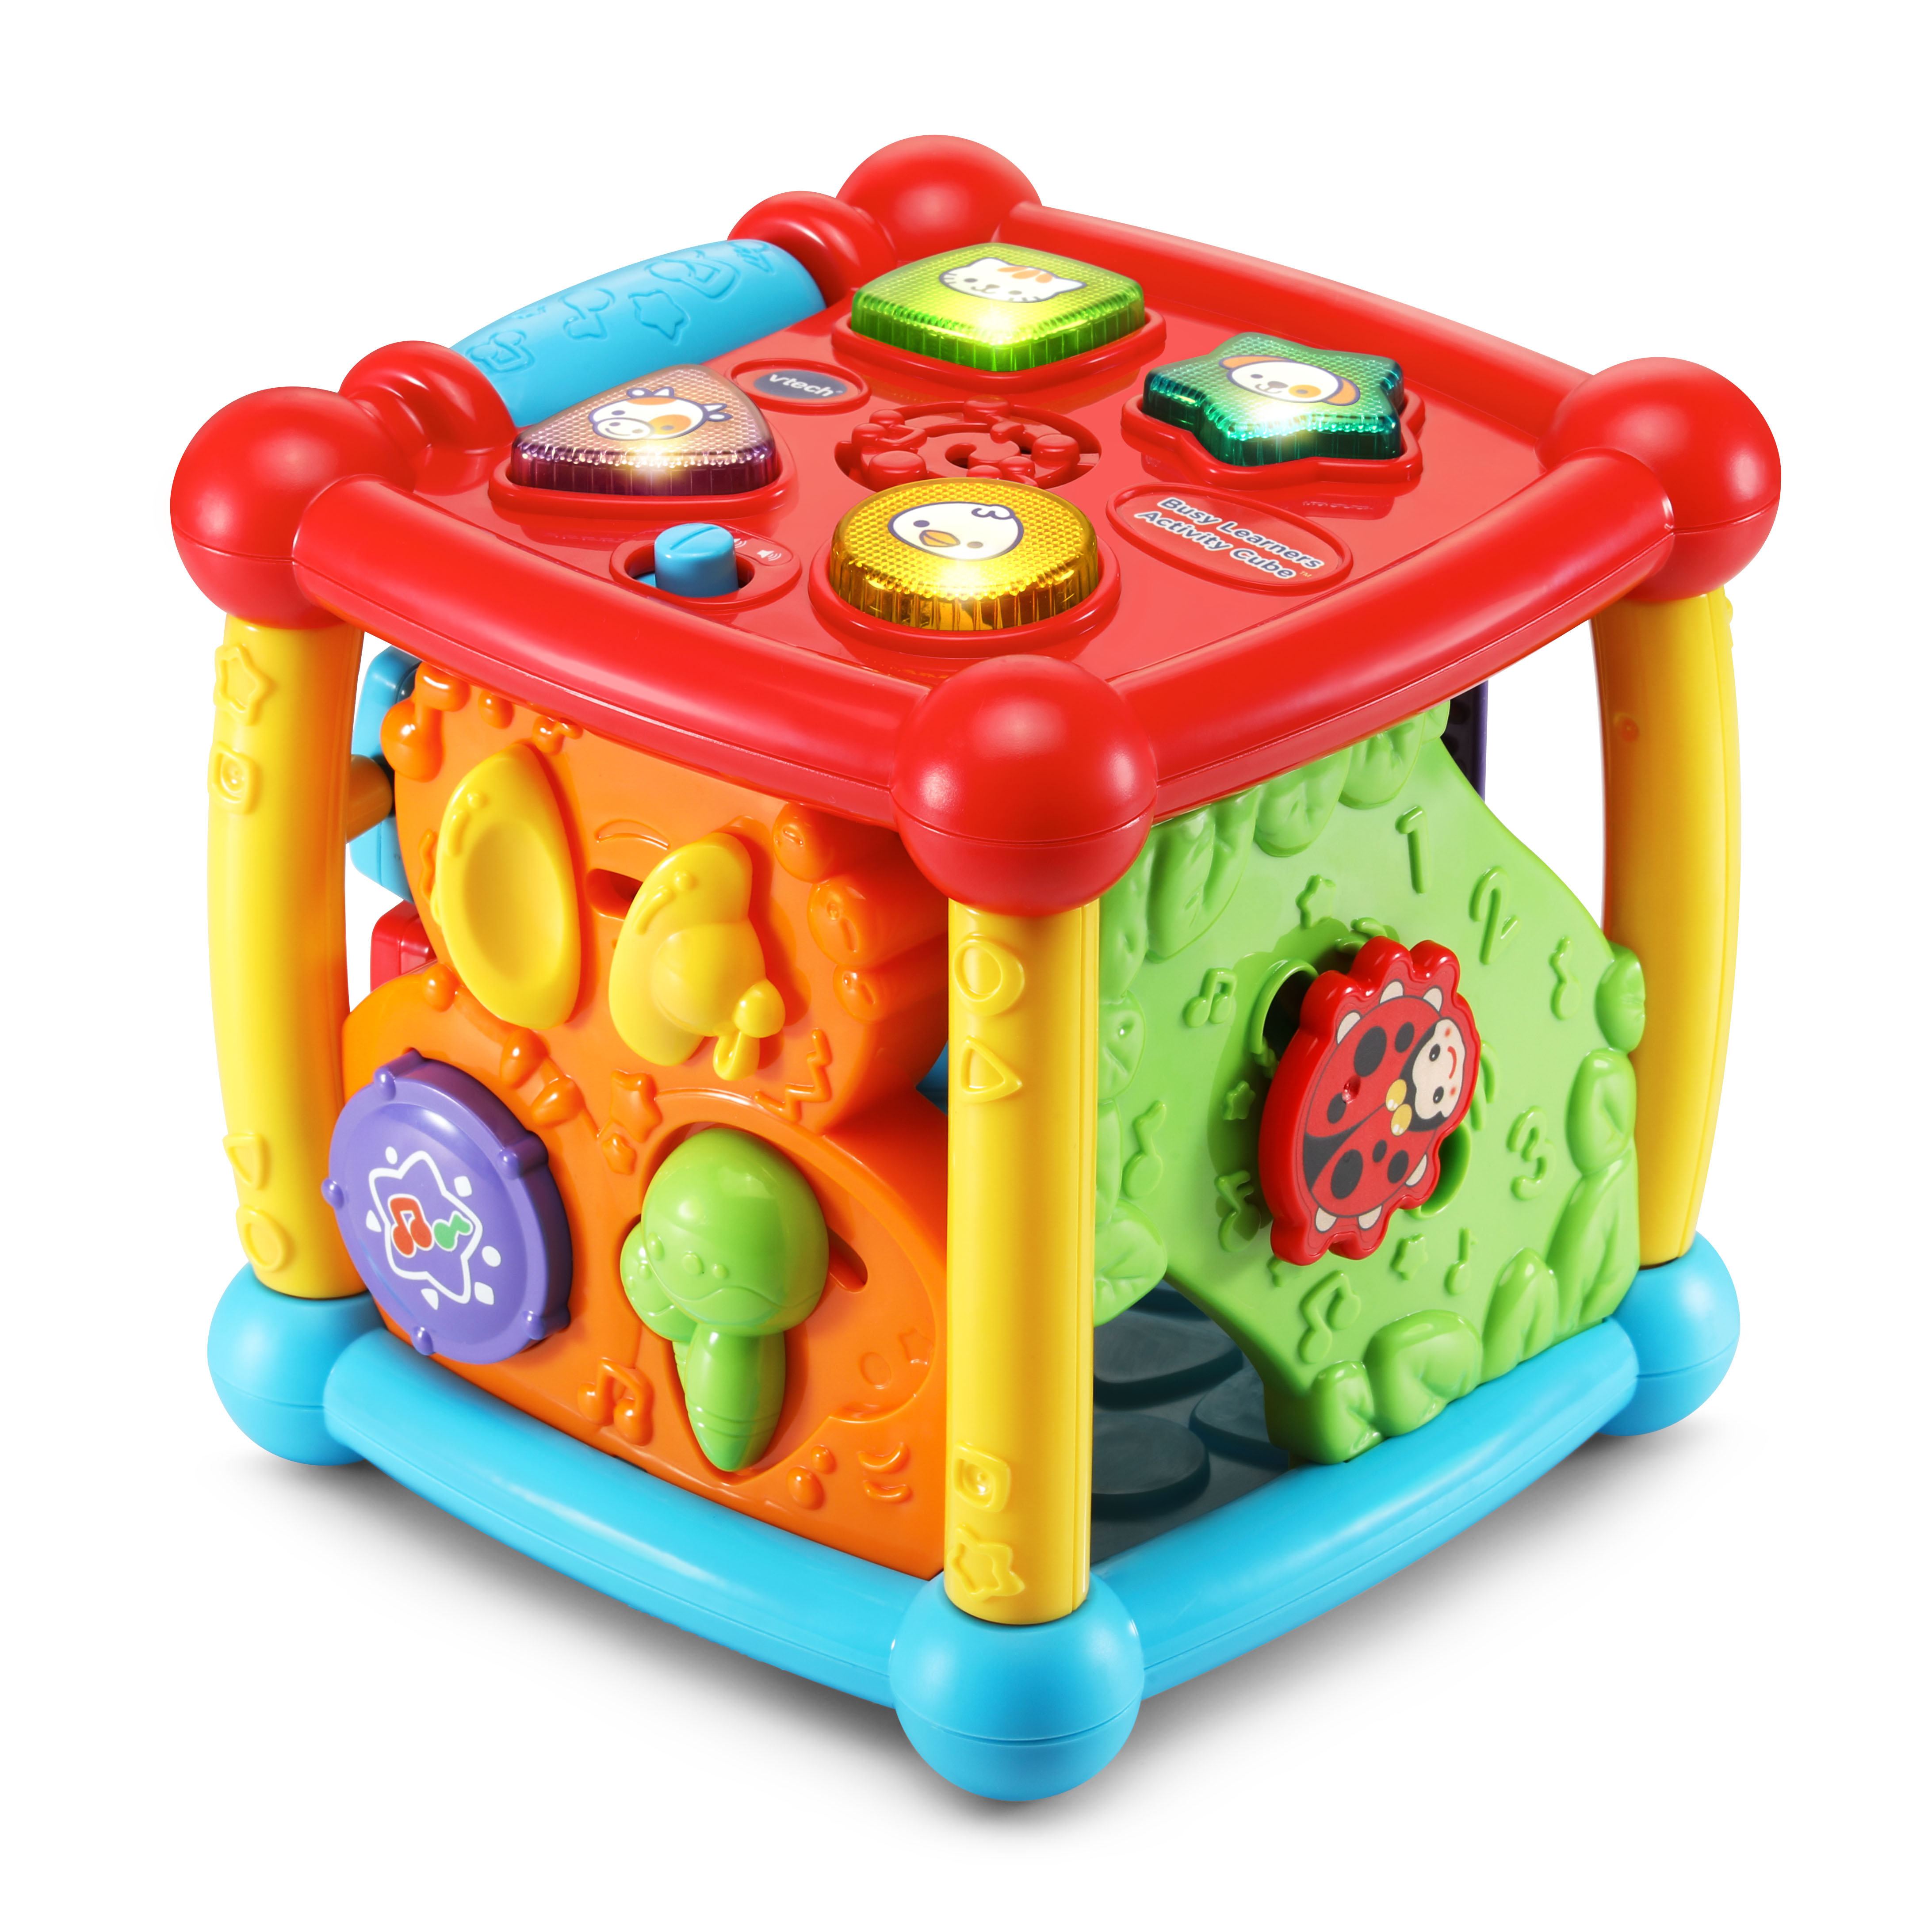 VTech Busy Learners Activity Cube - image 1 of 11